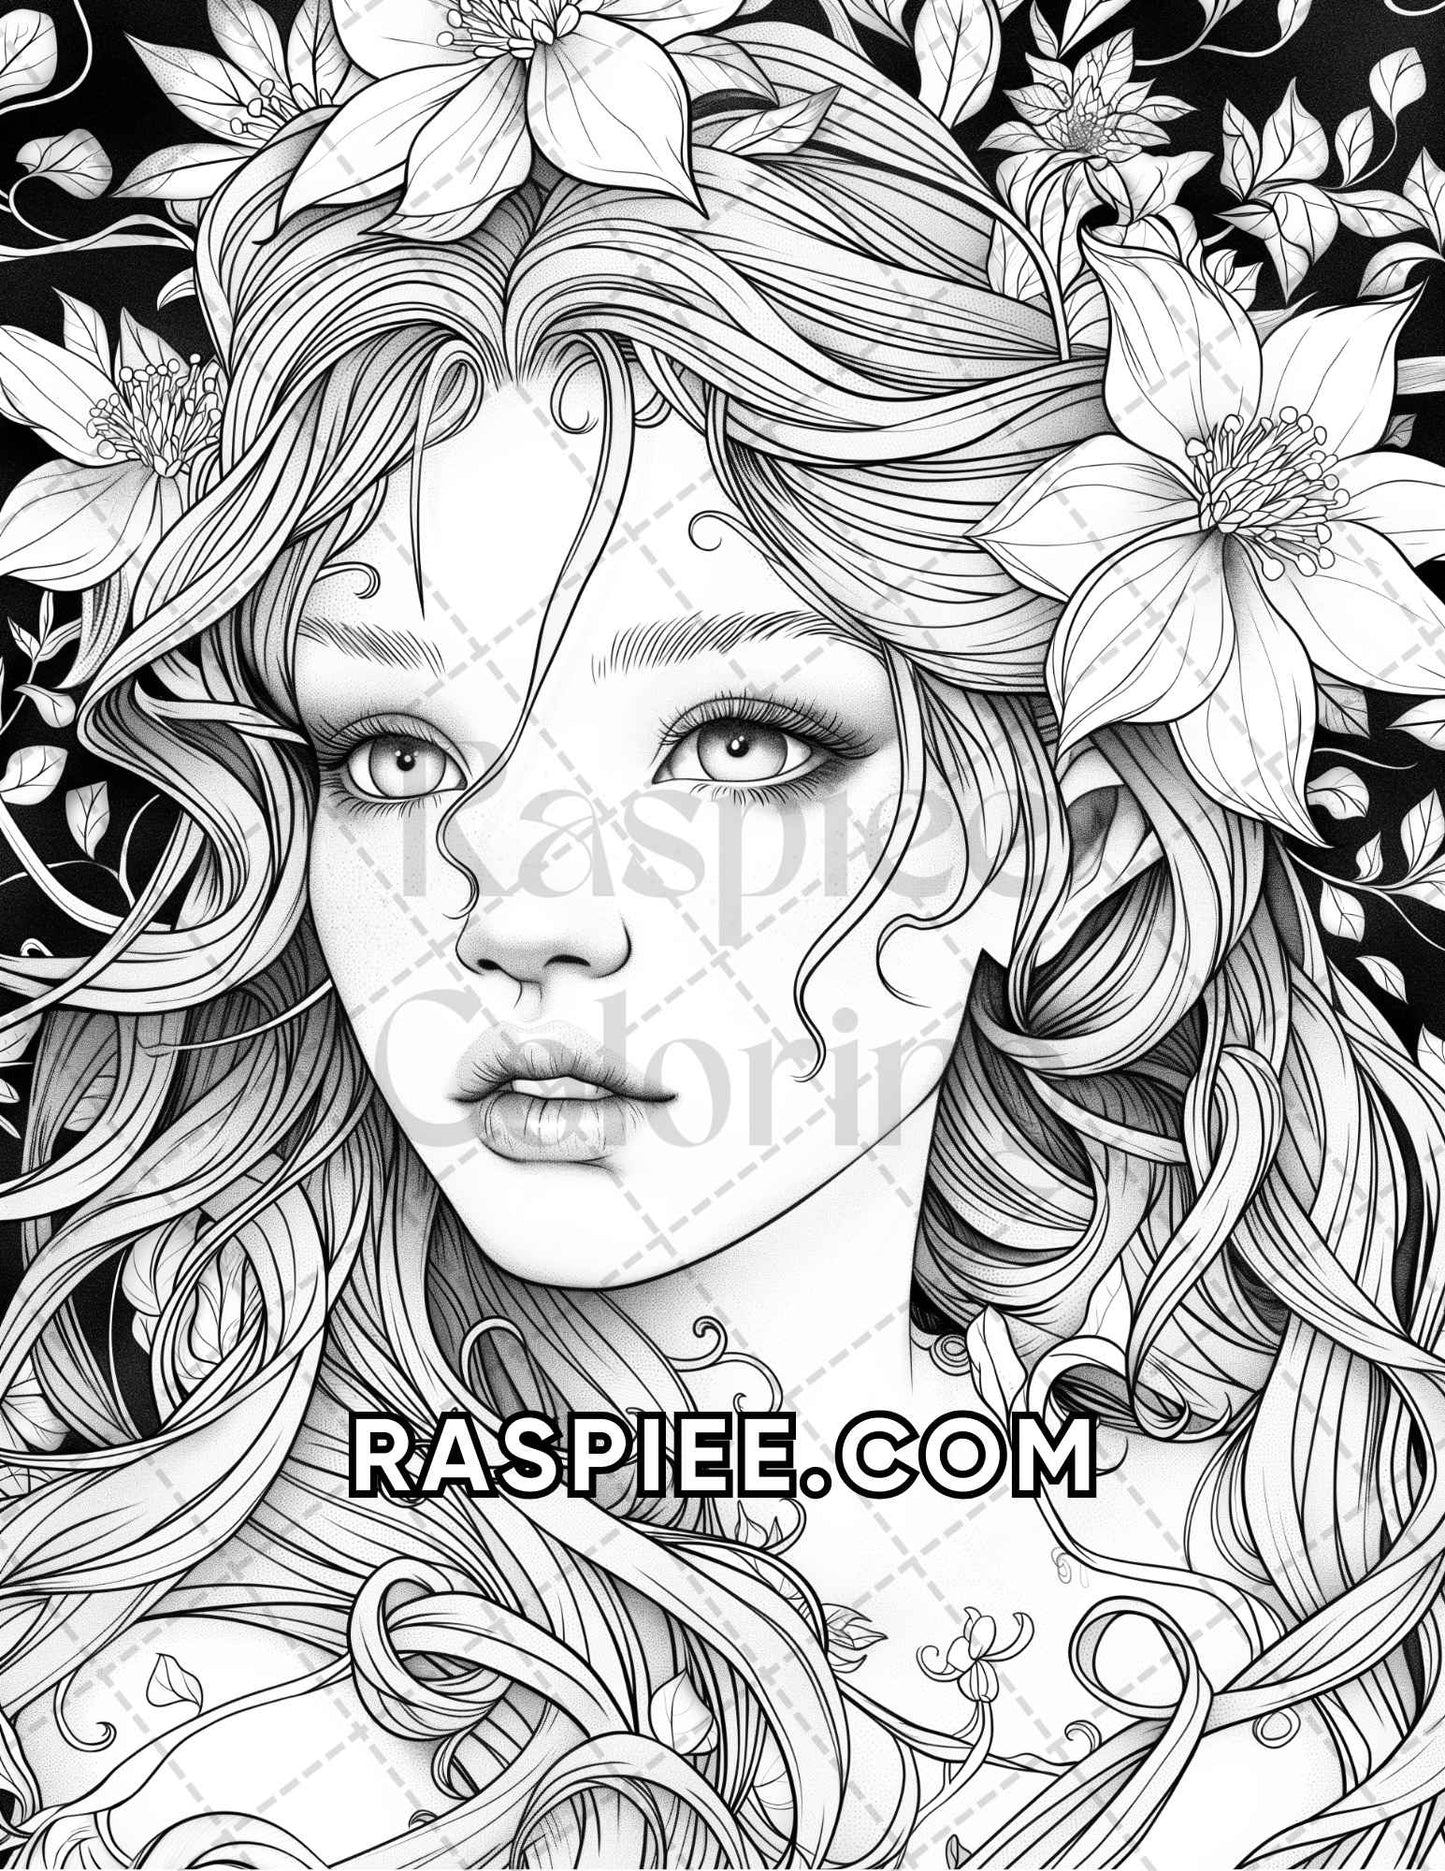 60 Fantasy Beauties Grayscale Adult Coloring Pages Printable PDF Instant Download